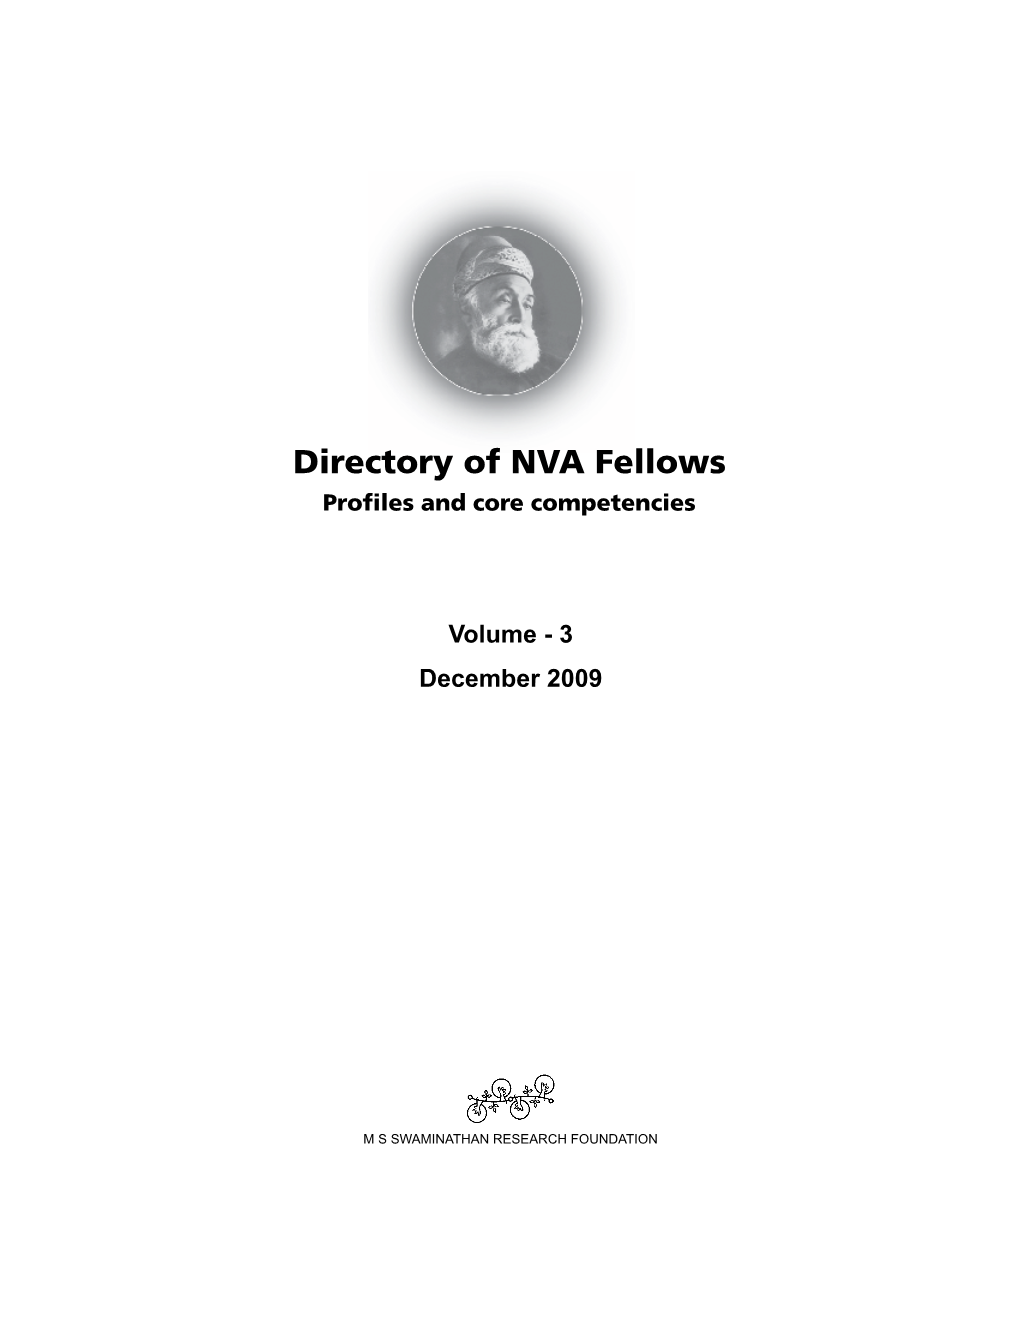 Directory of NVA Fellows Profiles and Core Competencies